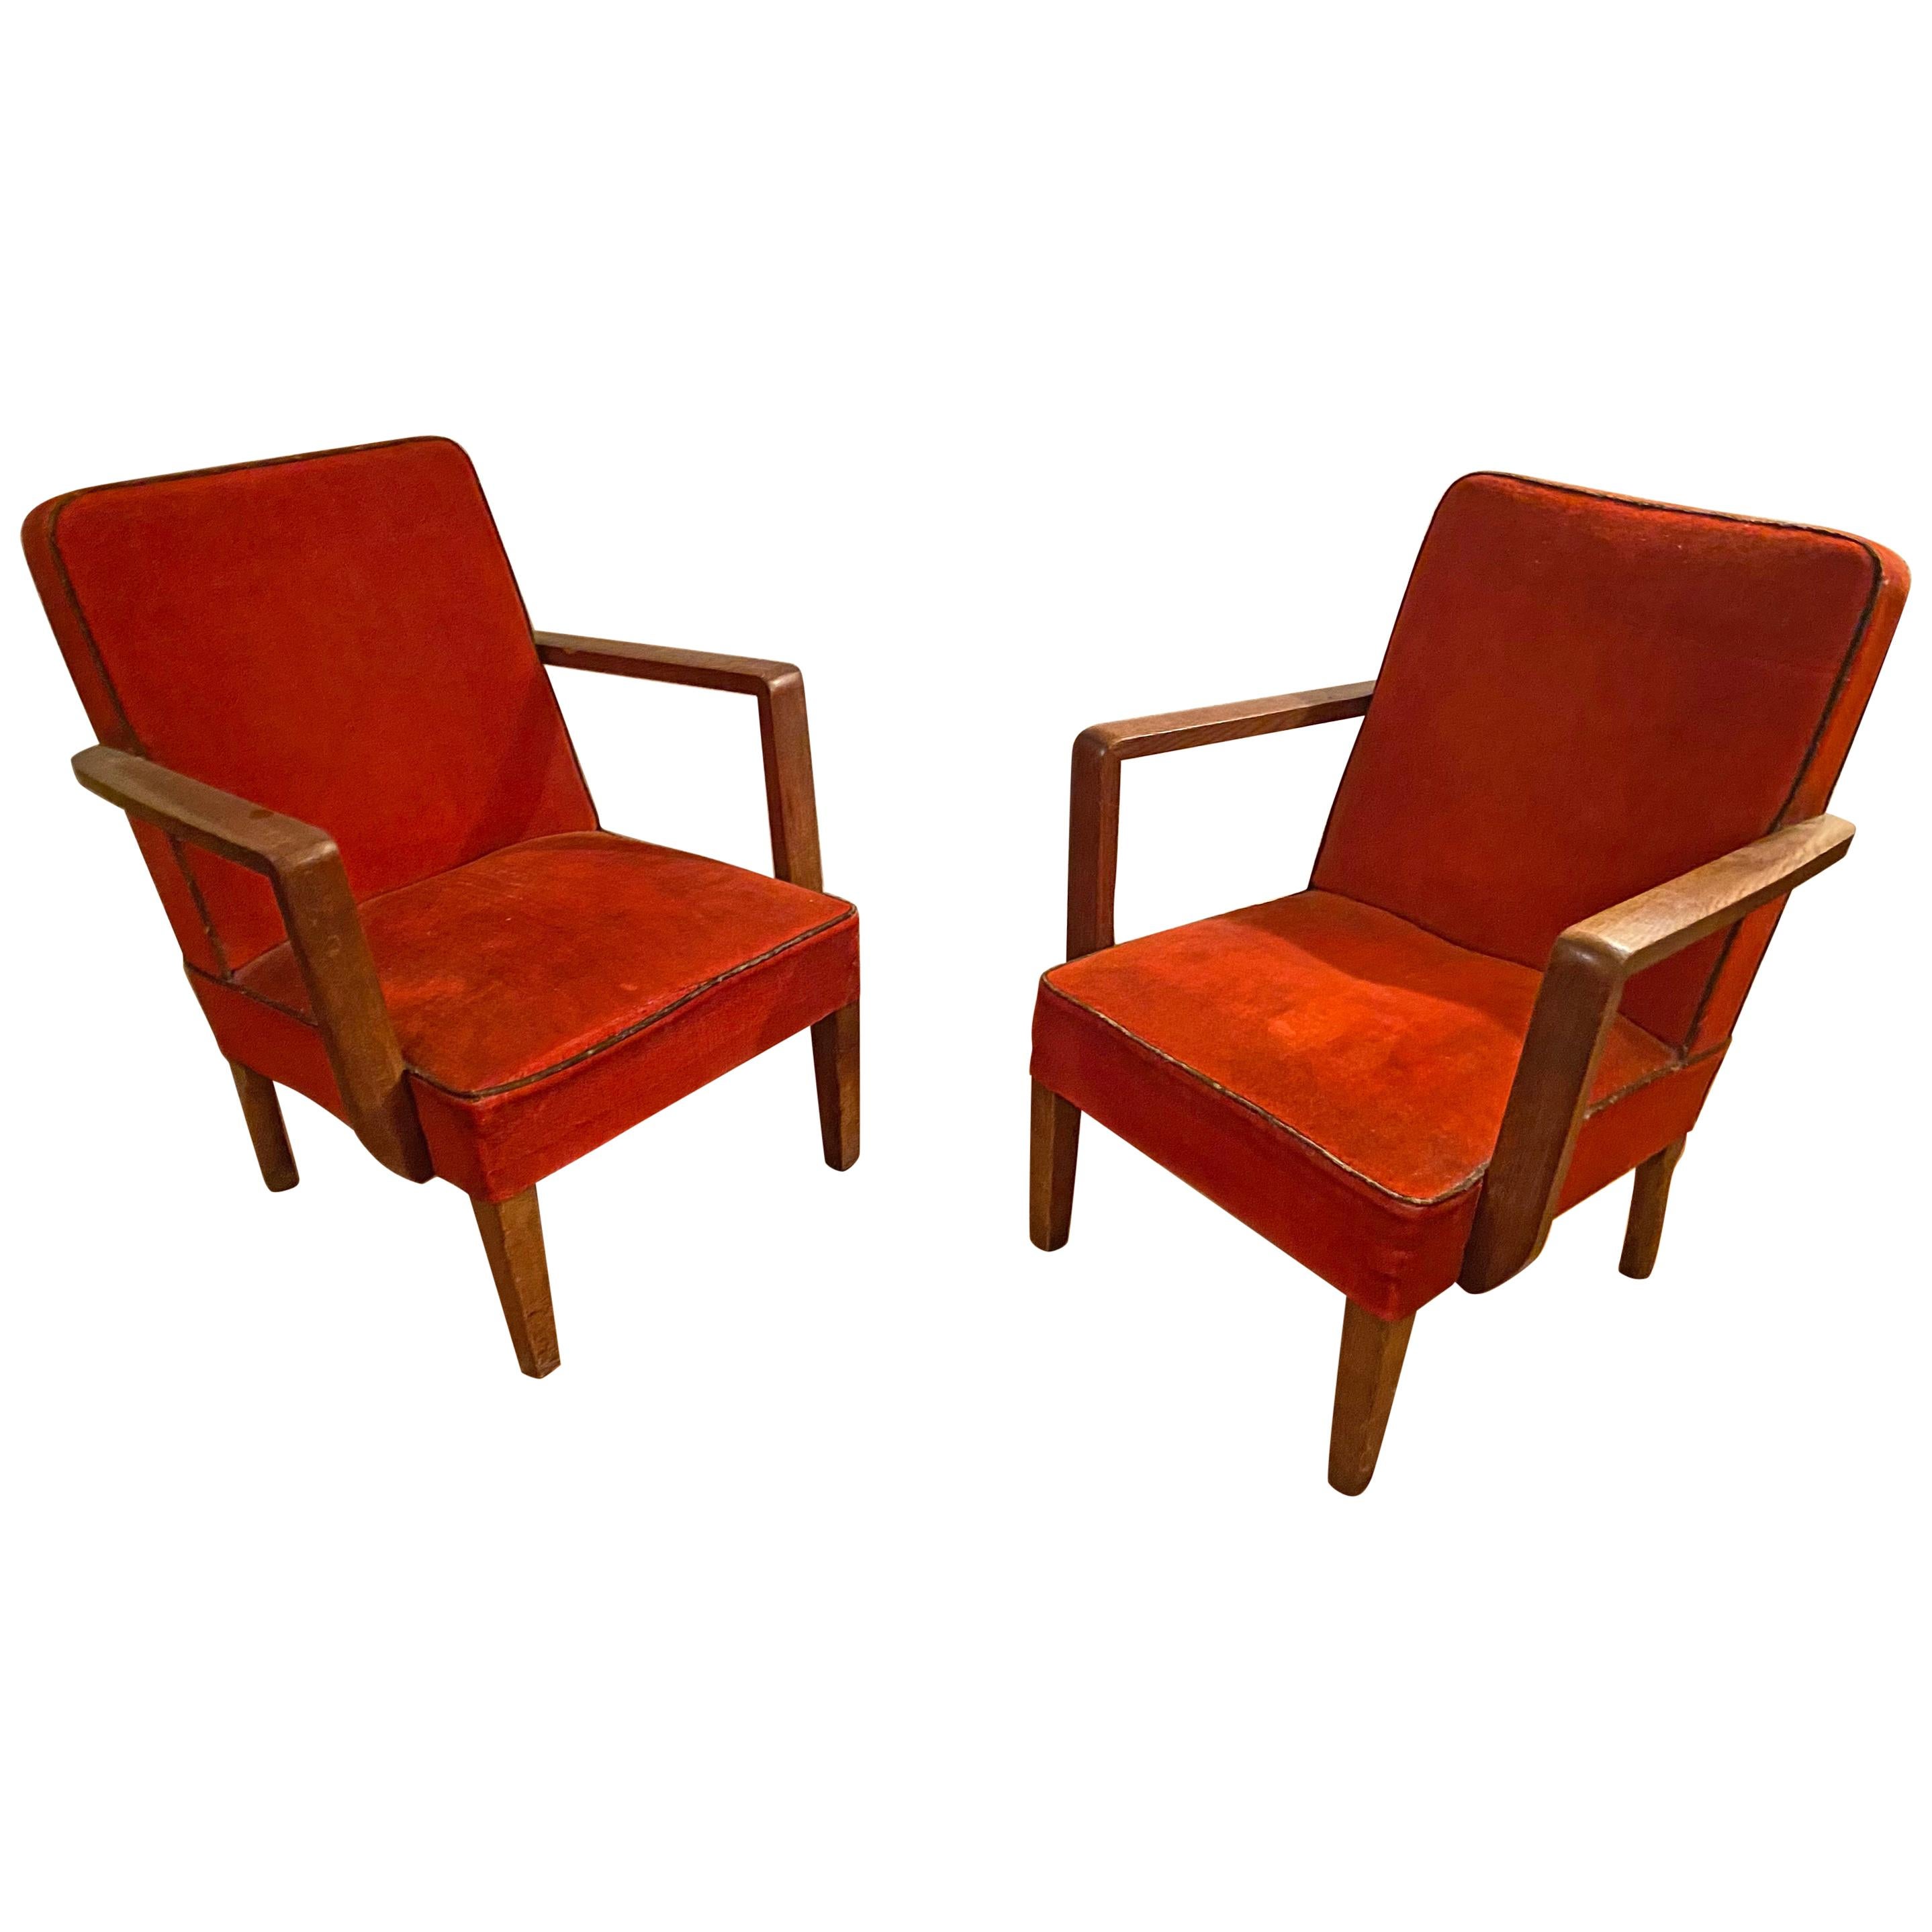 Pair of Art Deco Armchairs in Oak and Velvet, circa 1940-1950 For Sale